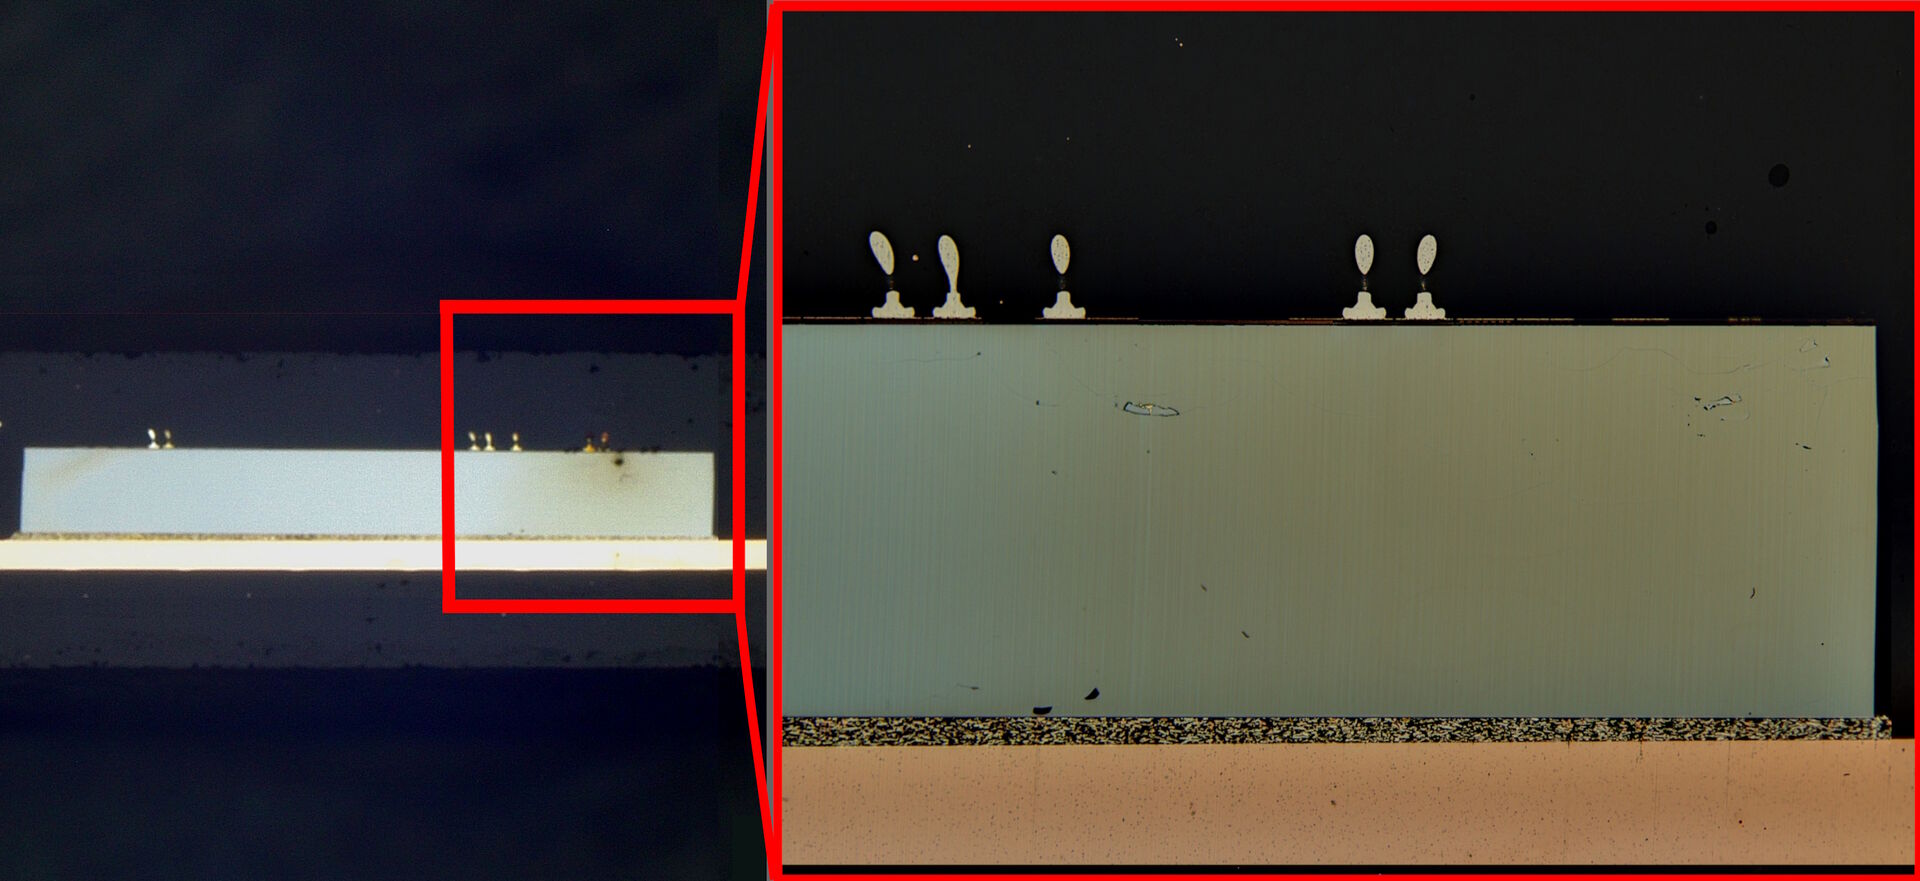 Optical microscope images of the cross section of an IC chip: Left) low magnification overview and Right) higher magnification view of the area of interest (marked with the red box). More details of the wire bonding and layers in the chip are seen at higher magnification.